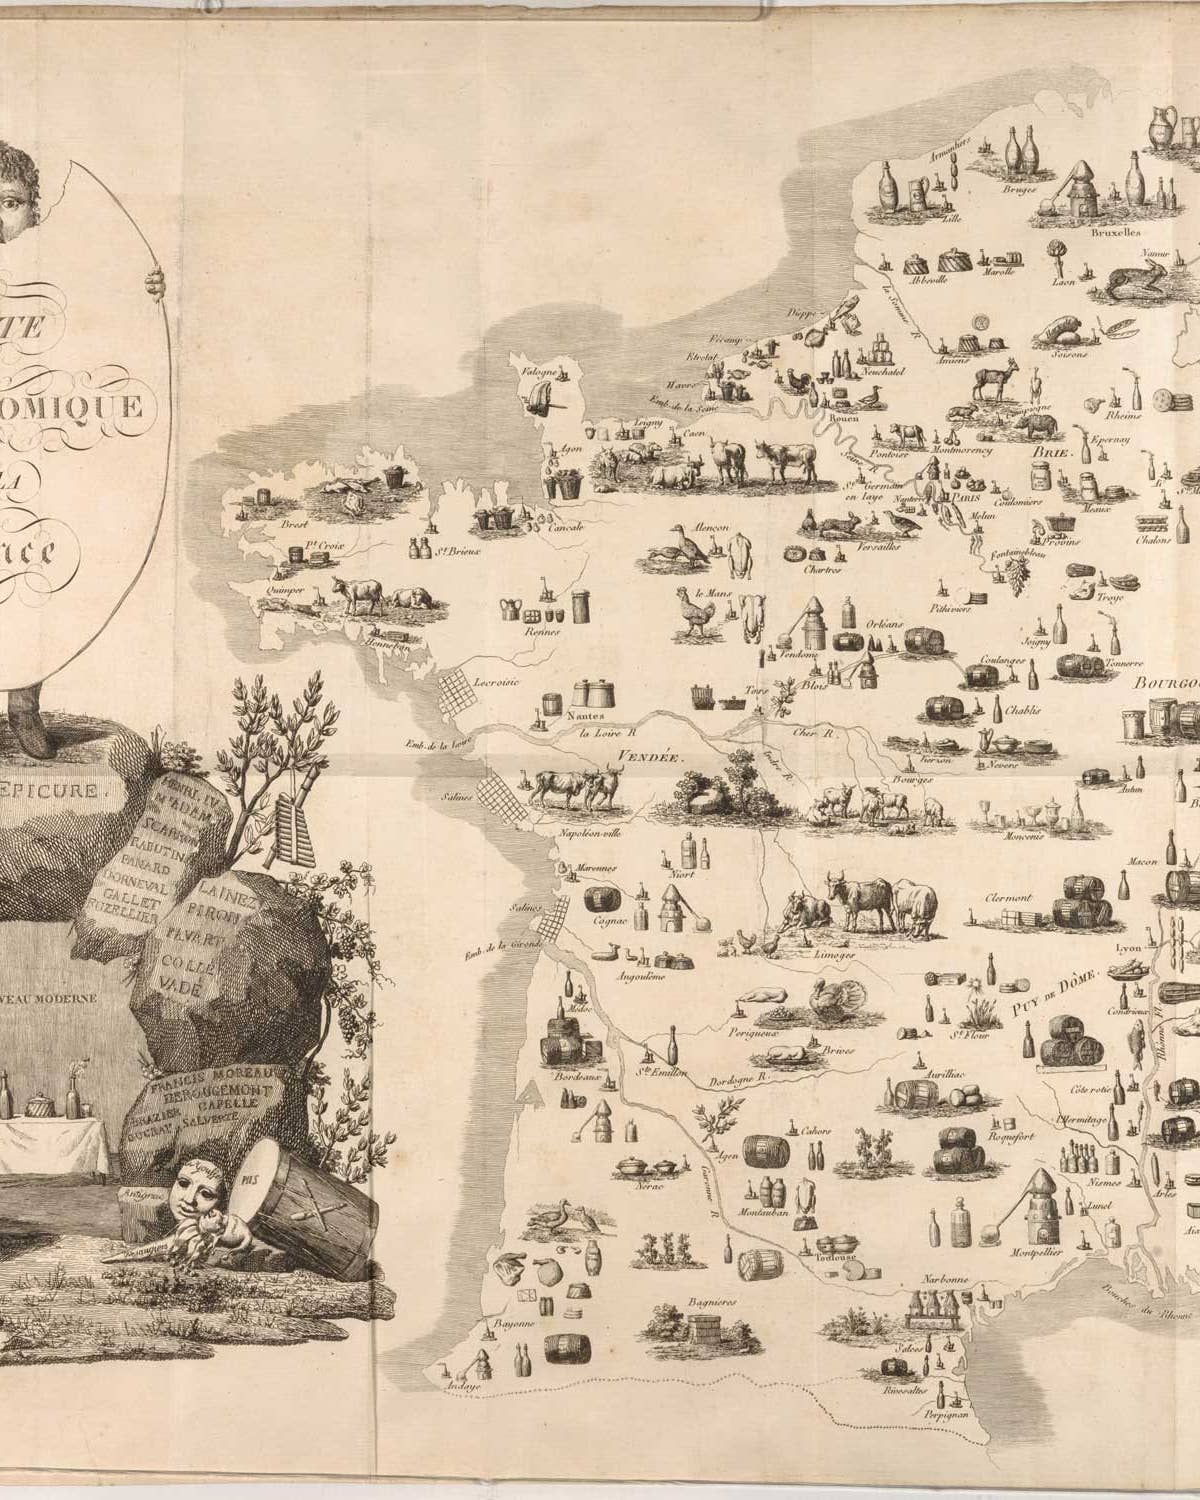 This 200-Year-Old Map Tells You Where All Your Favorite French Foods Come From